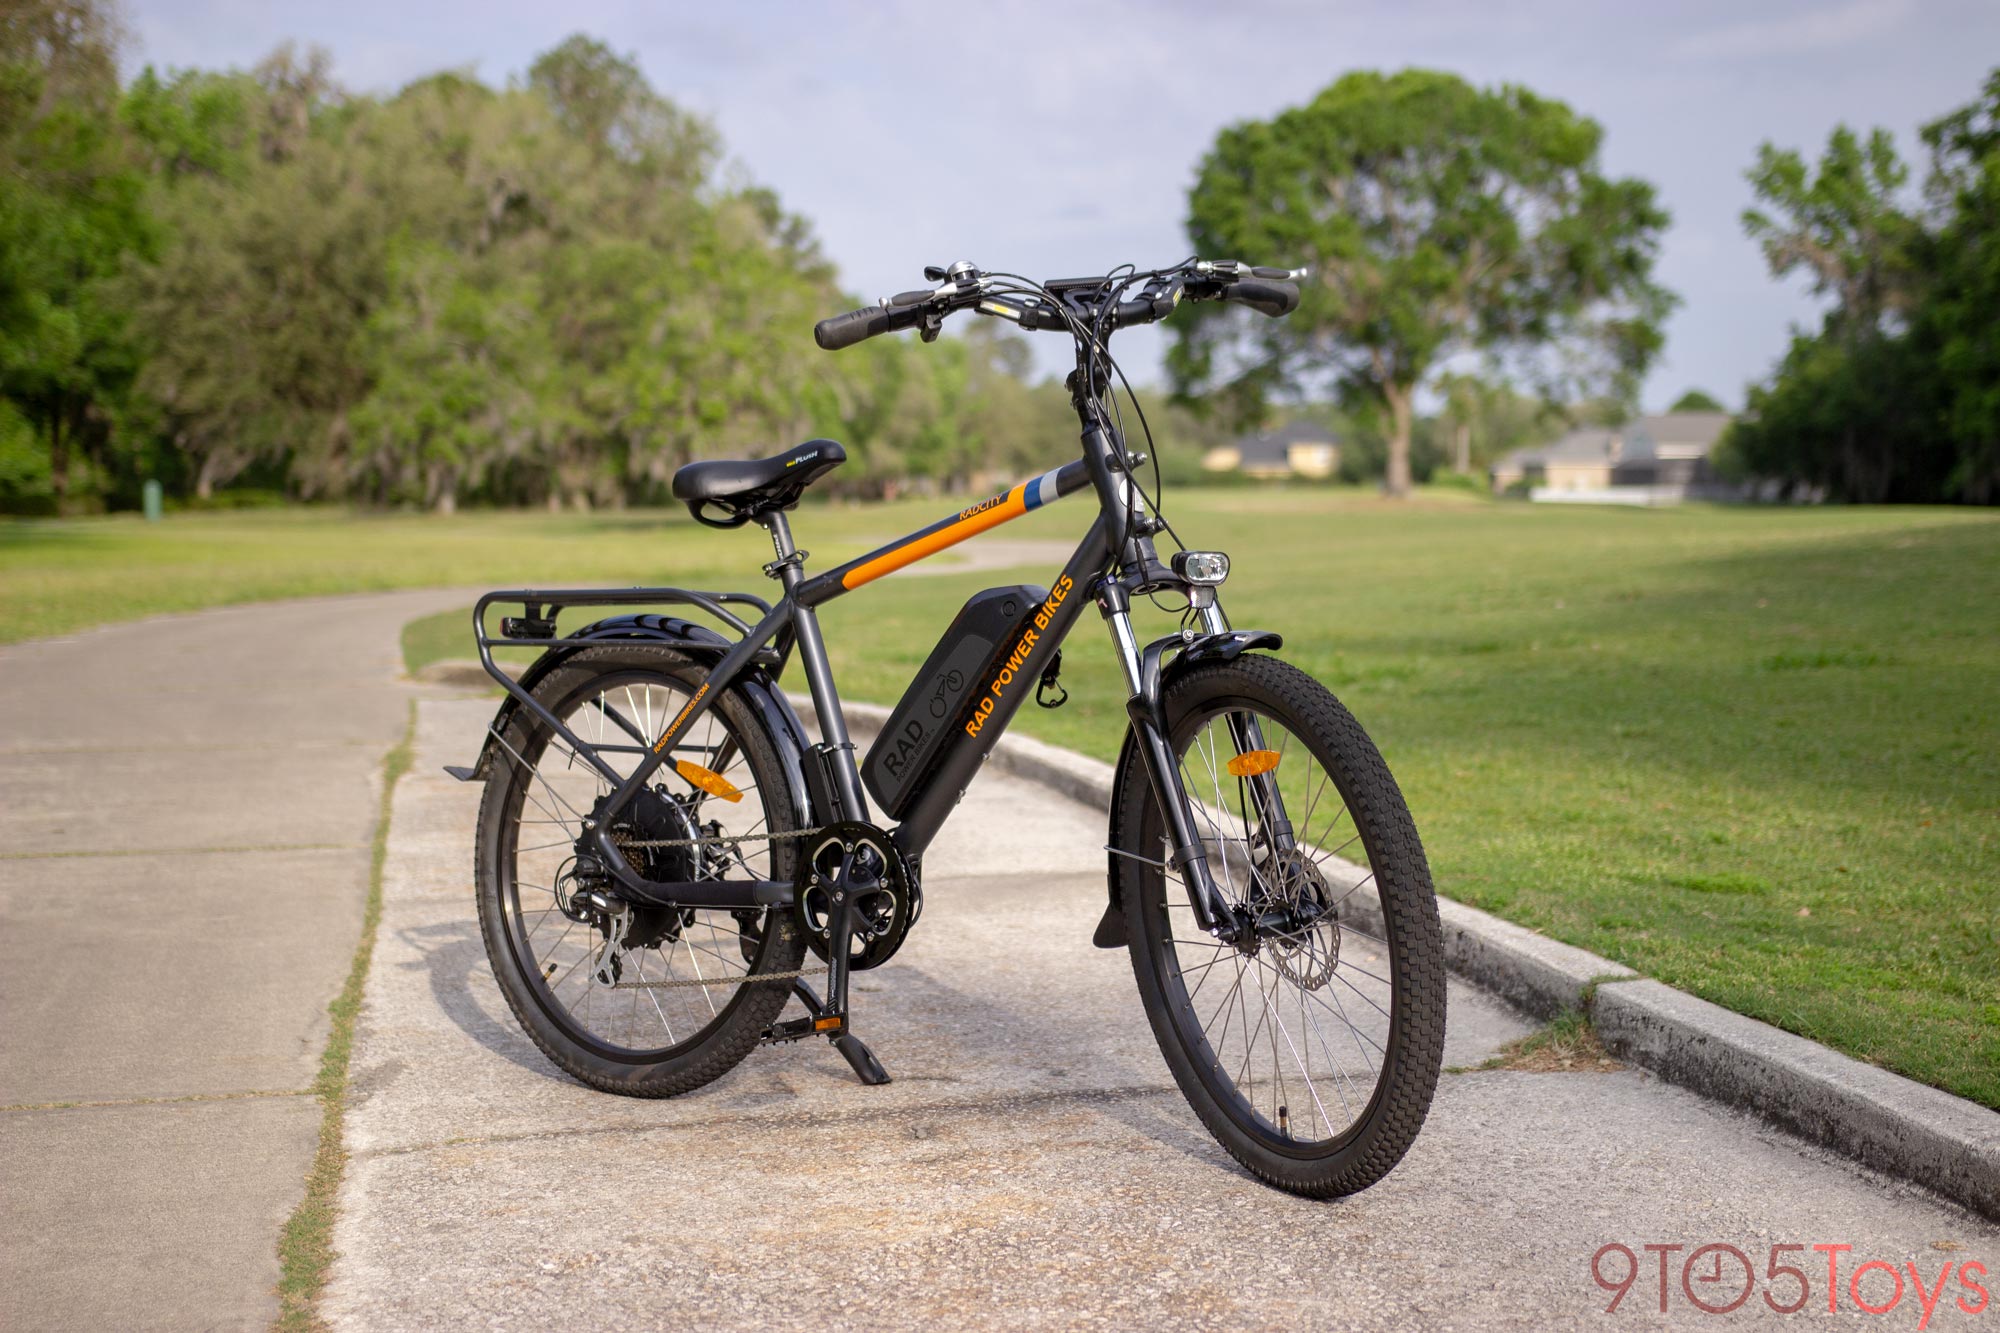  Review: RadCity is a great value eBike for commuters w/ 20 mph speeds & 45 mile range